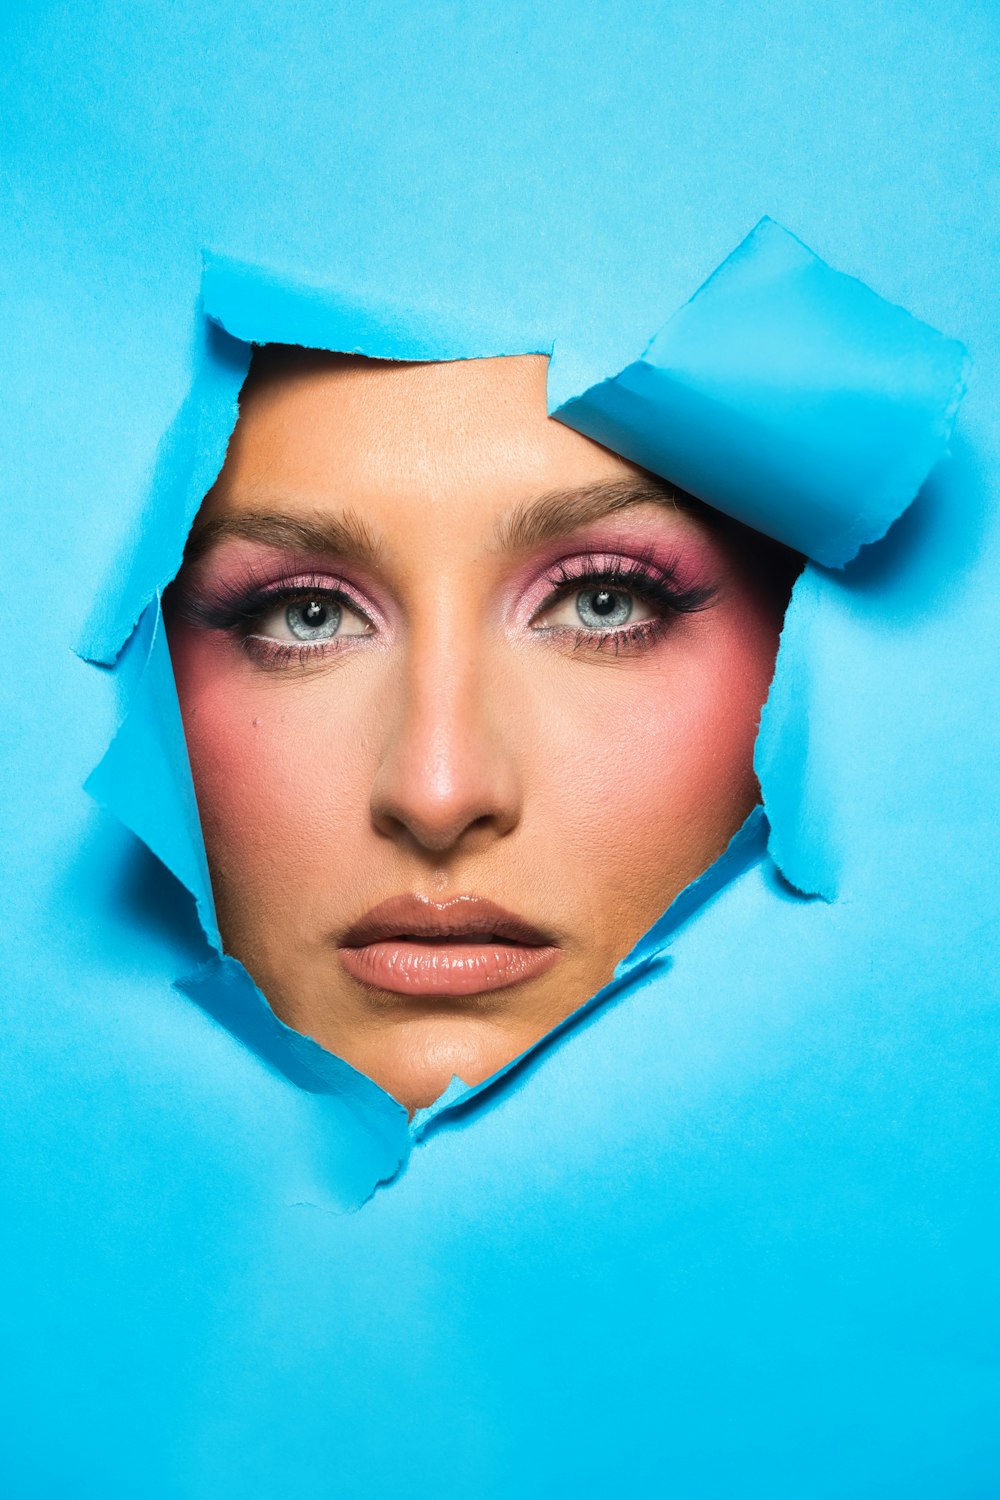 a woman's face is seen through a hole in blue paper